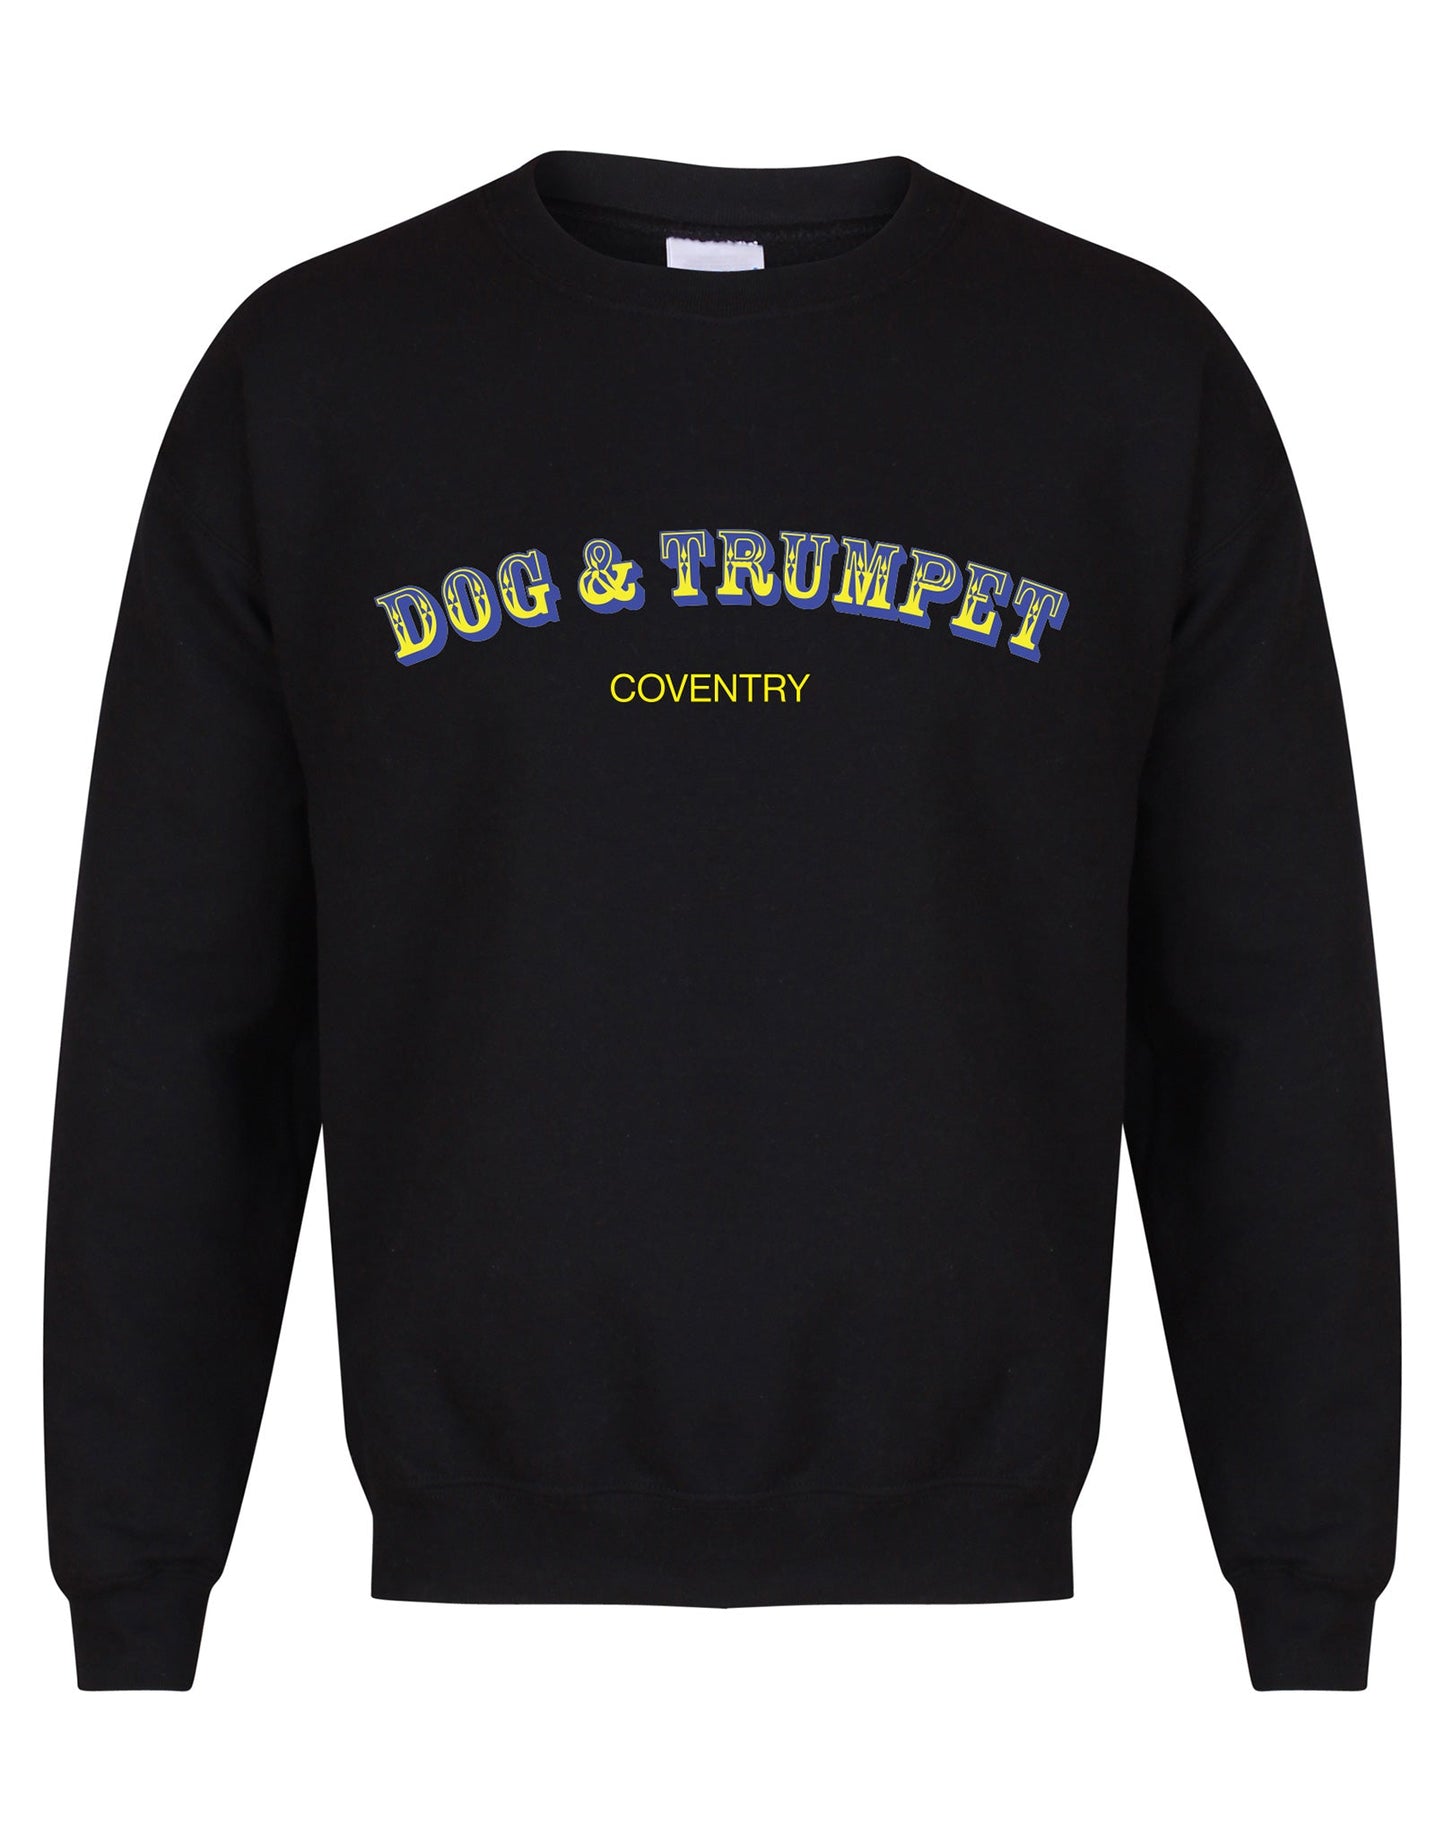 Dog & Trumpet unisex fit sweatshirt - various colours - Dirty Stop Outs